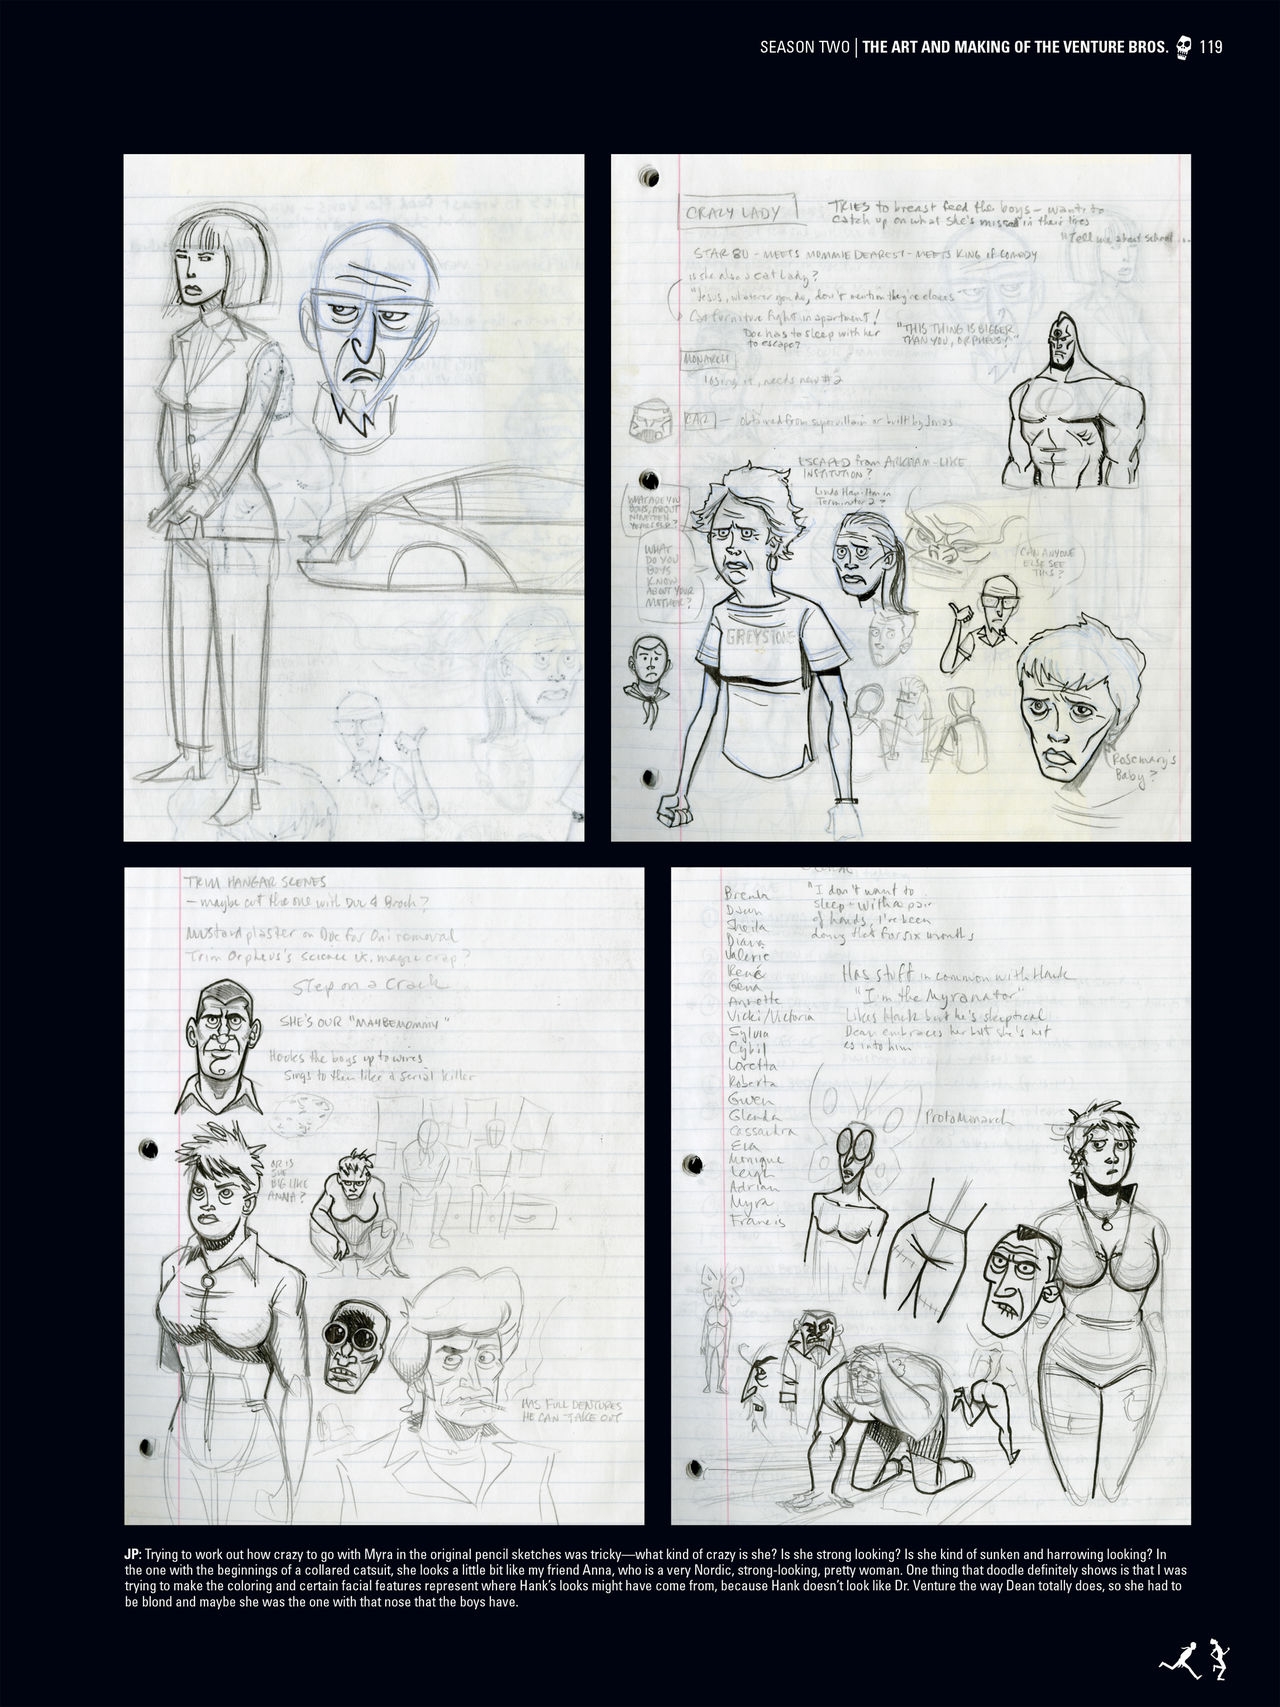 Go Team Venture! - The Art and Making of the Venture Bros 118